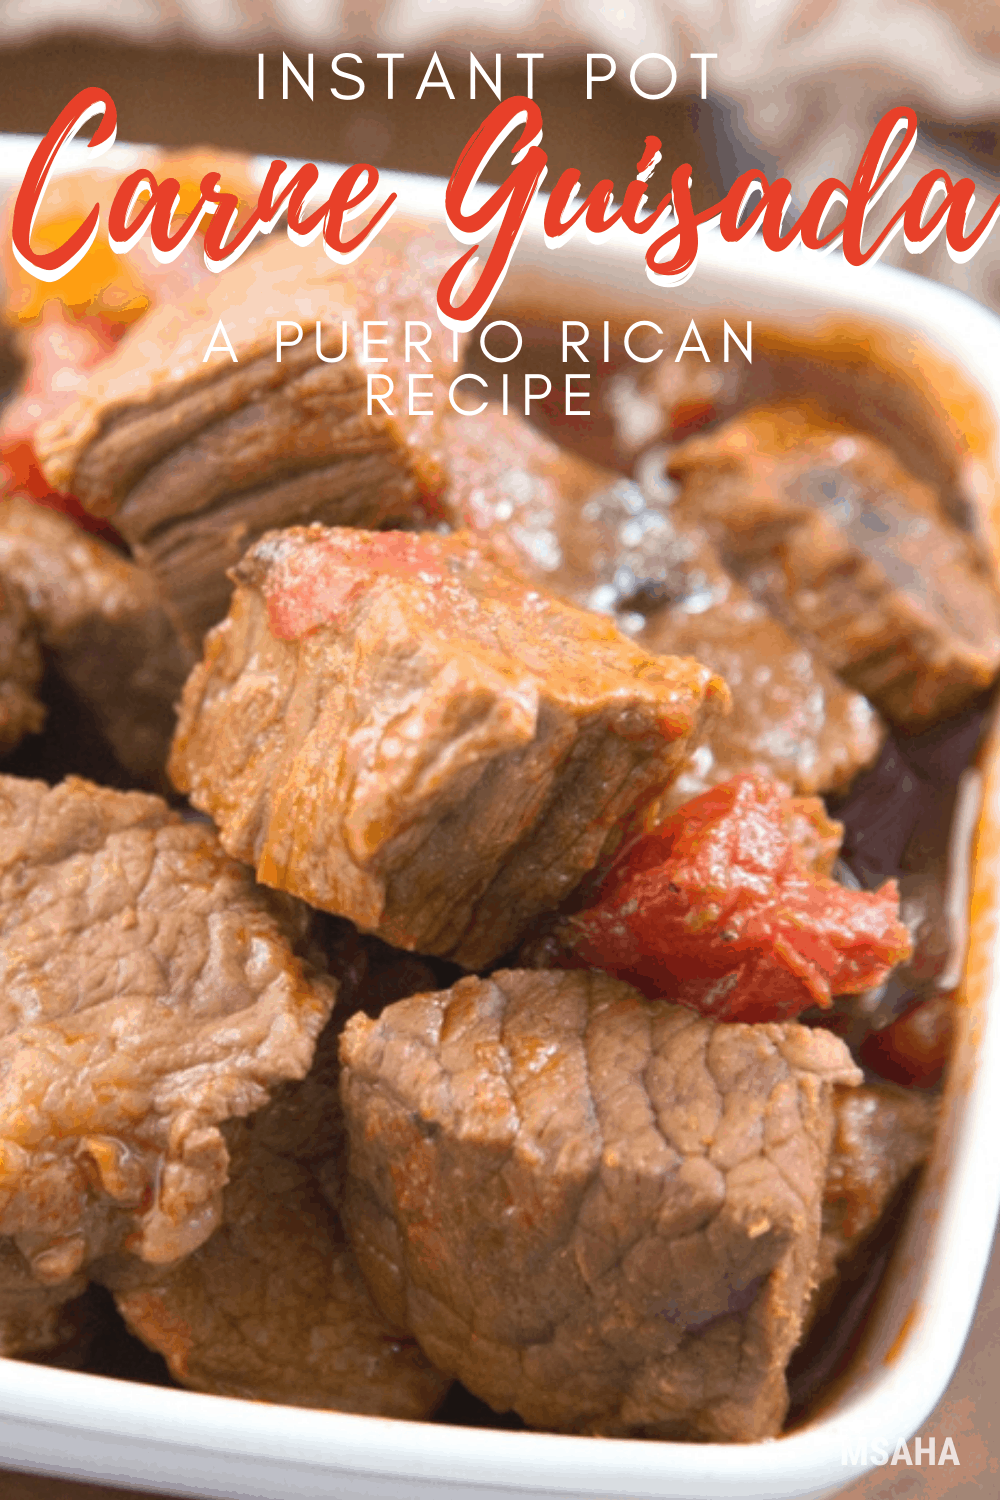 Delicious and flavorful Puerto Rican Carne Guisada or beef stewed made using an Instant Pot. Find out how easy it is to make this authentic dish. #puertoricanrecipe #puertoricanfood #instantpot via @mystayathome